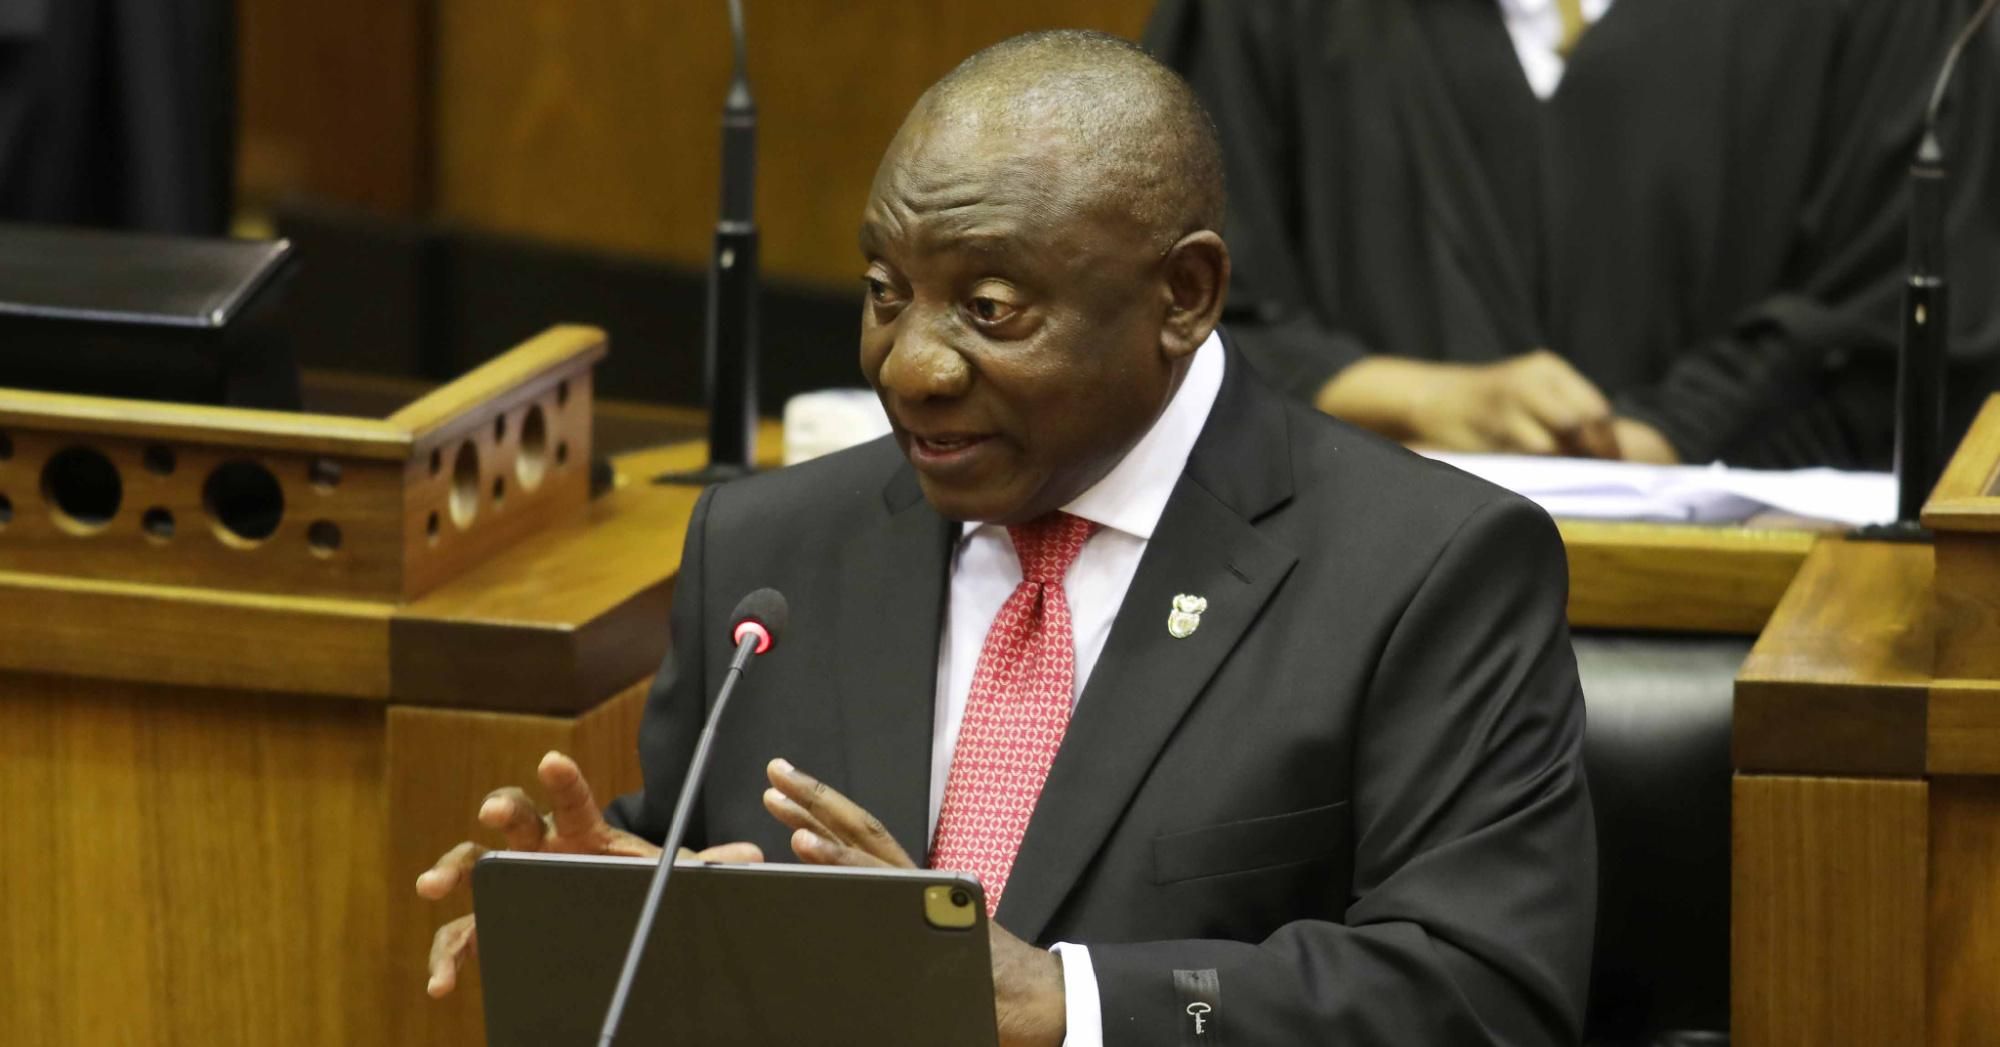 South African President Cyril Ramaphosa delivers his fifth State of the Nation address in front of a nearly empty parliament on February 11, 2021.